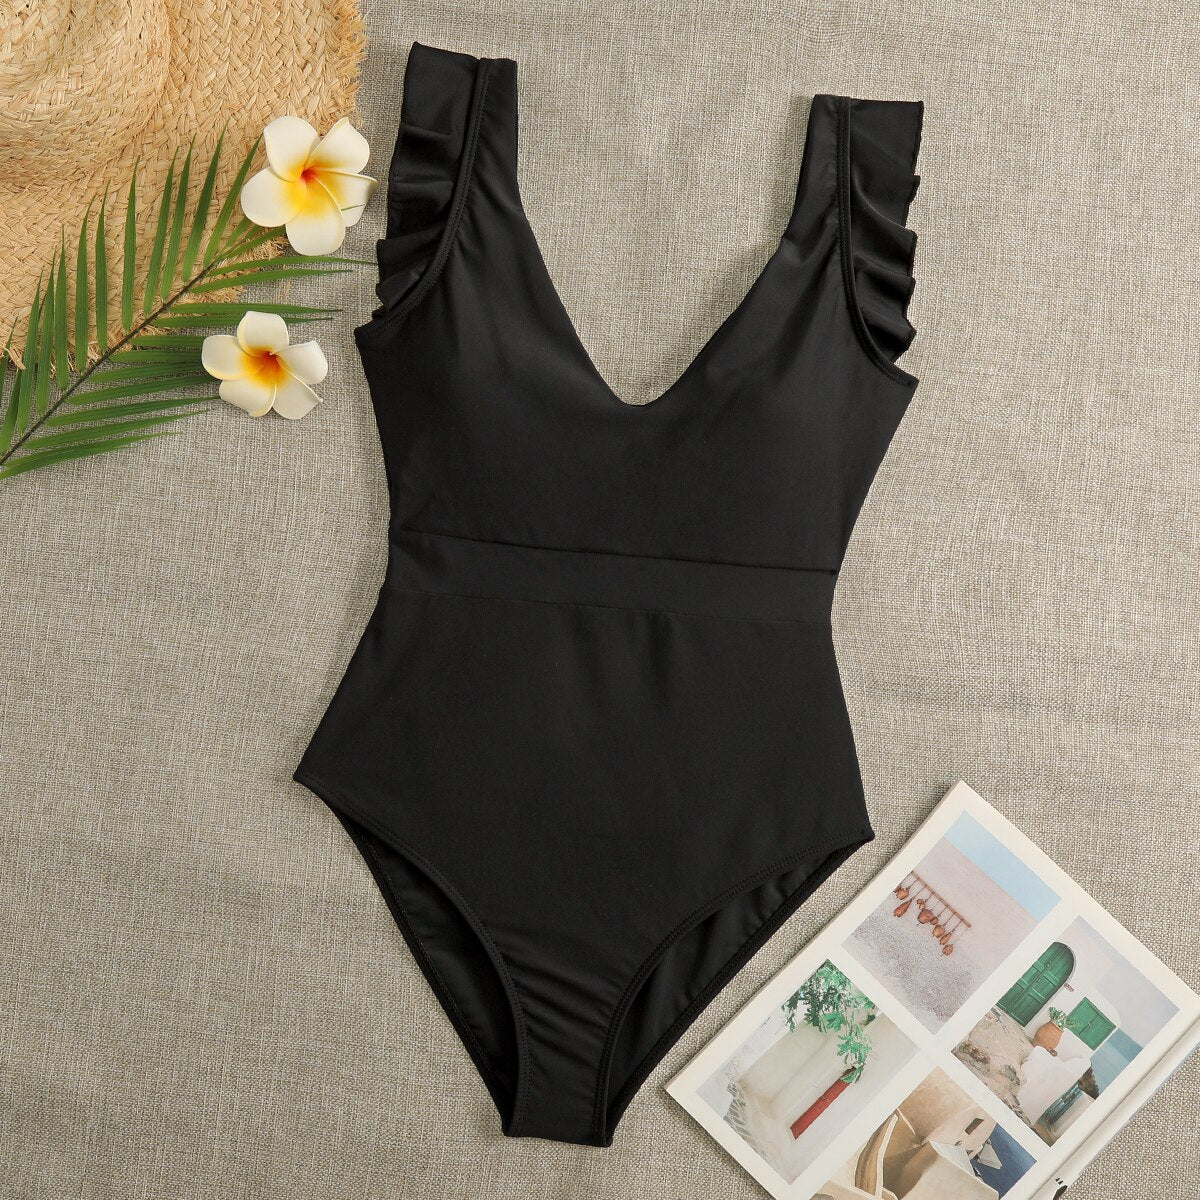 Ruffle One-Piece Swimsuit - Swimsuits